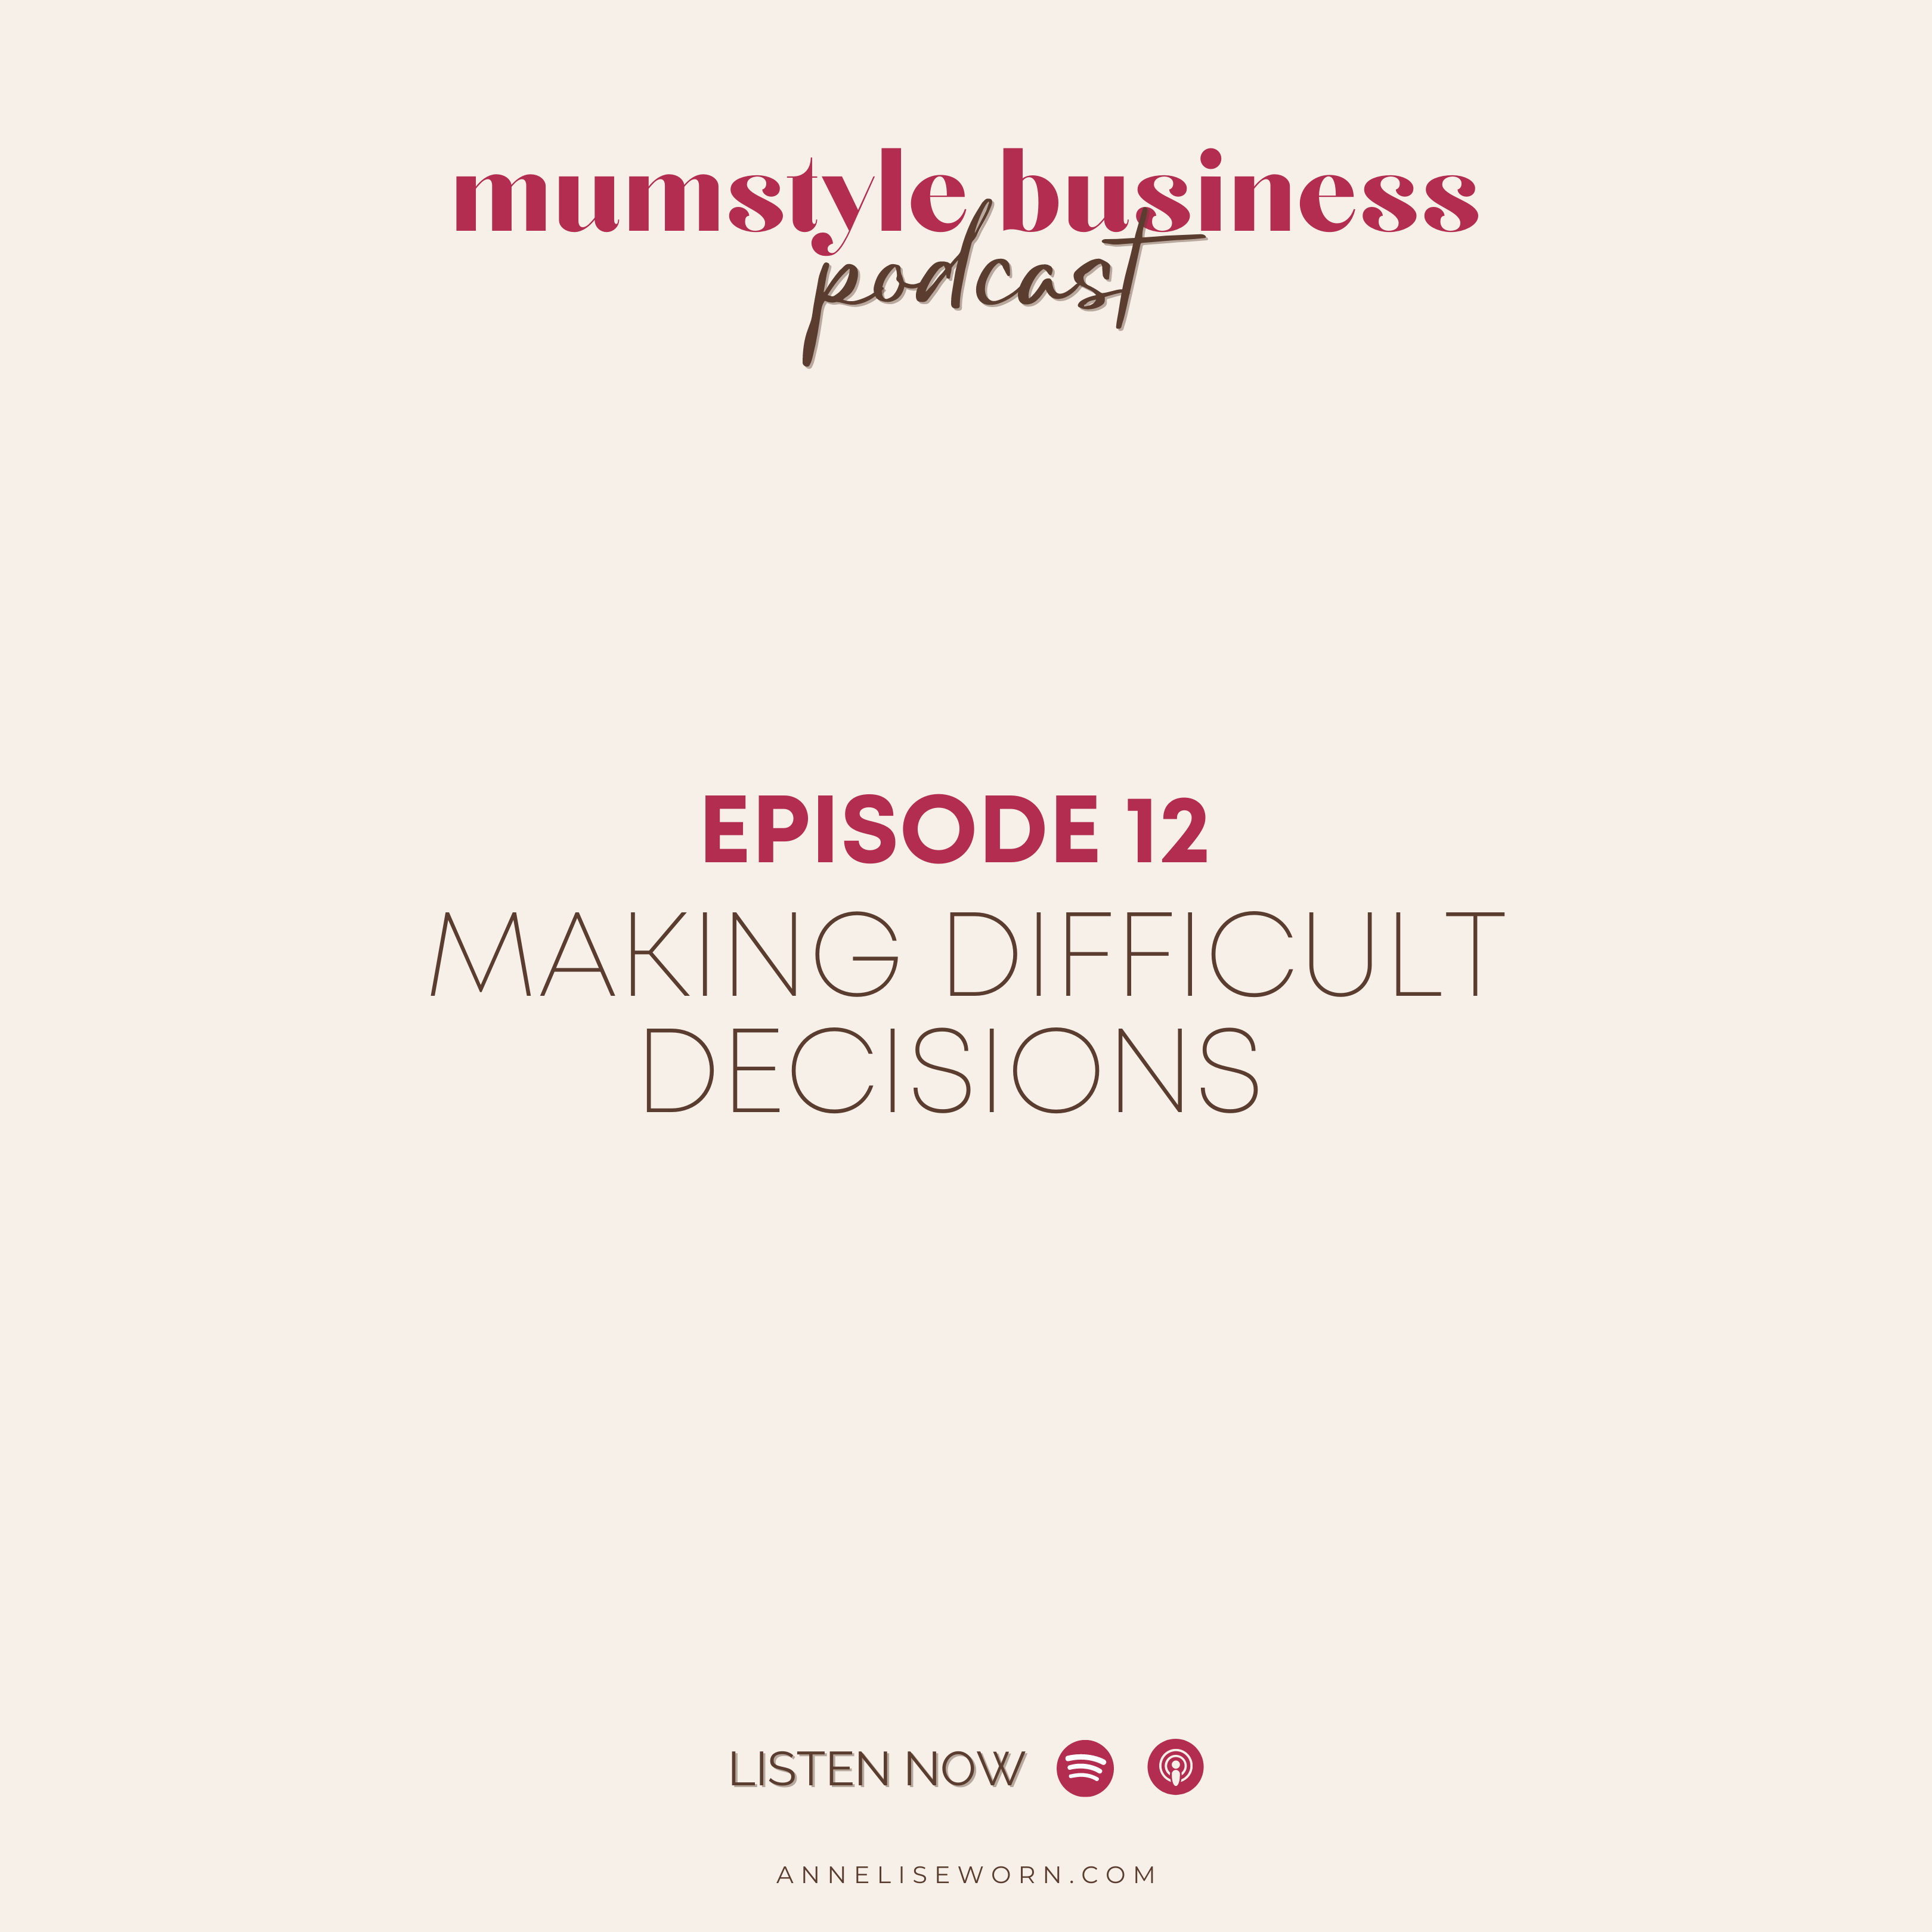 Featured image for “S2E12: Making Difficult Decisions: Mumstyle Business Podcast”